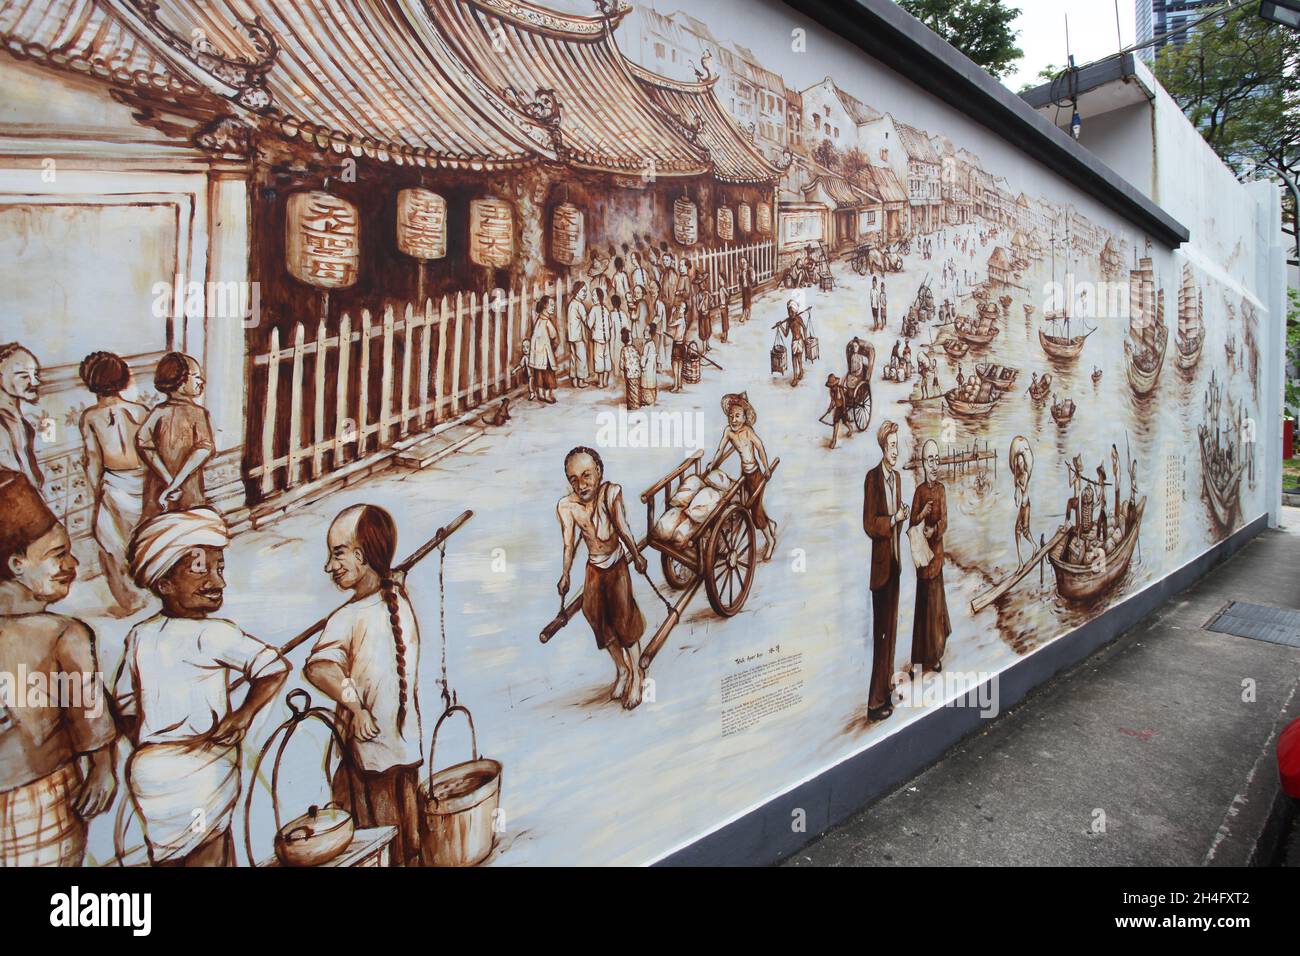 Thian Hock Keng Mural: An Immigrant’s Story. This mural is painted on the external back wall of the Thian Hock Keng temple in Singapore's Chinatown. Stock Photo